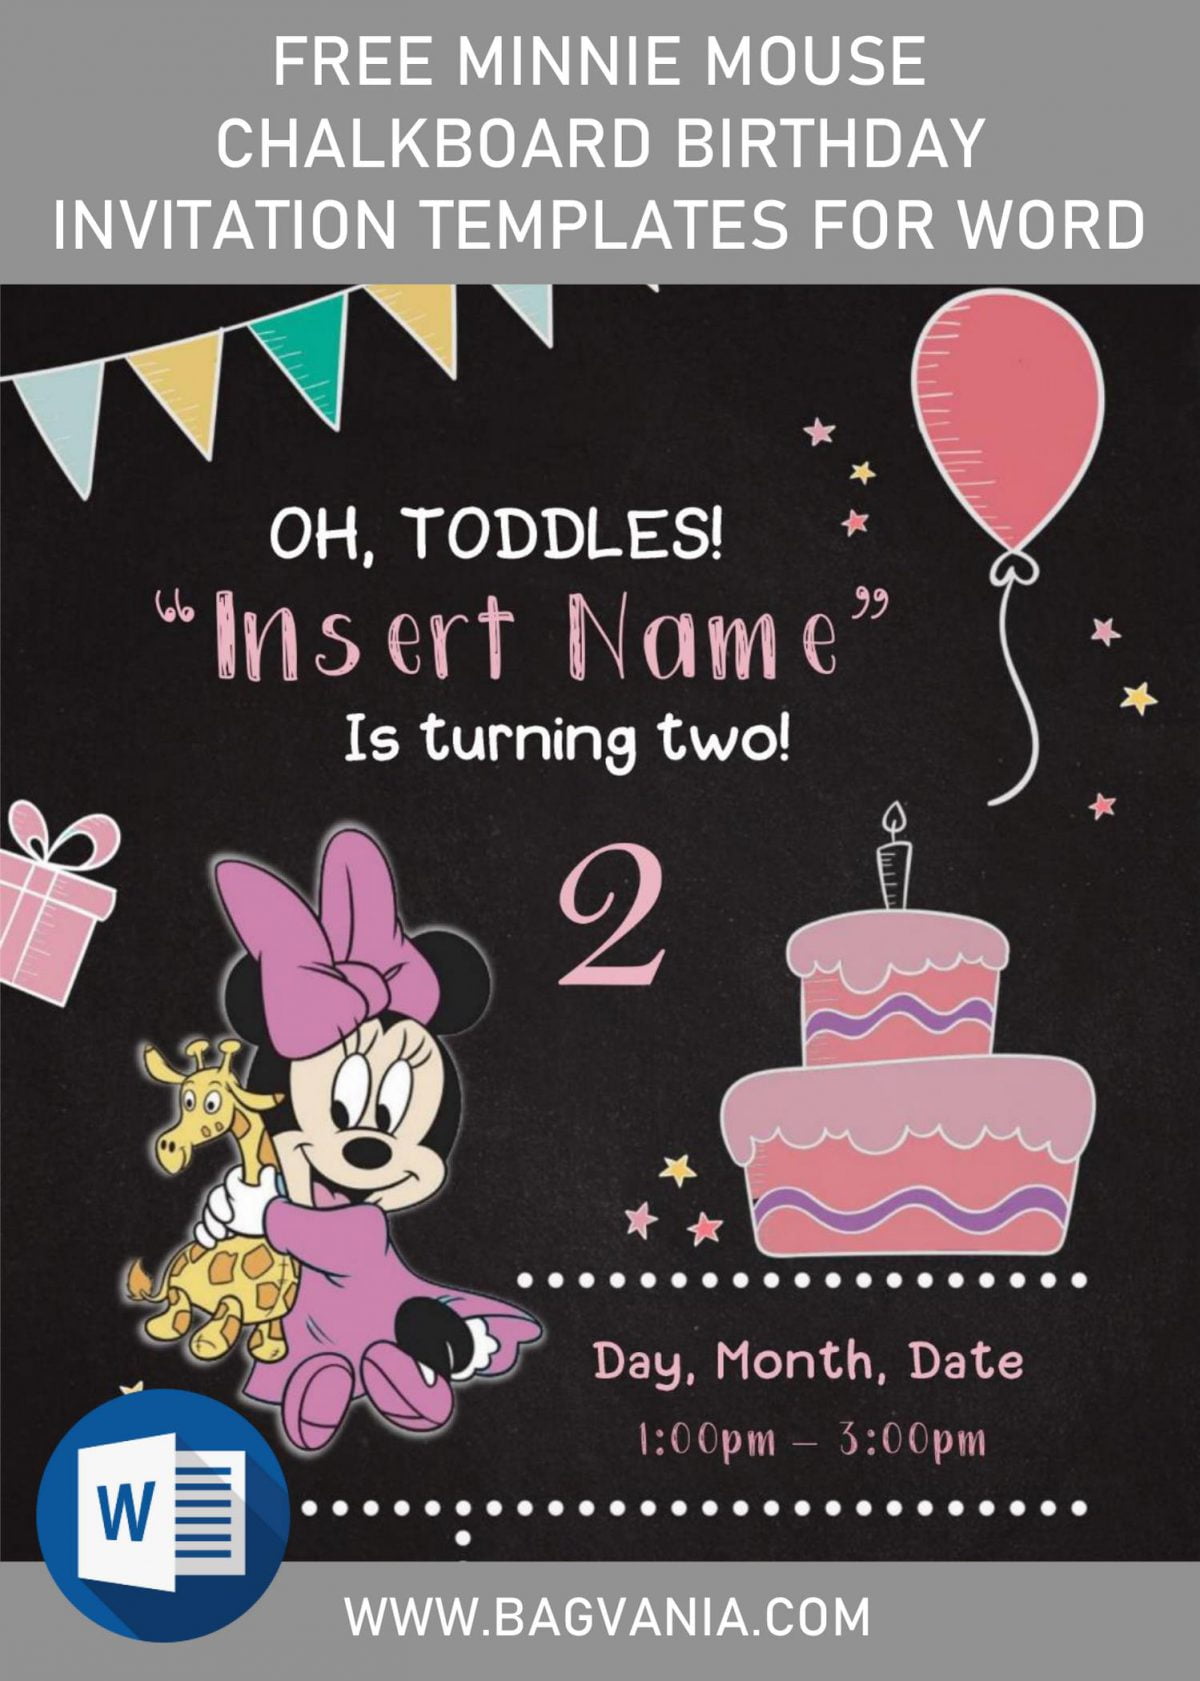 Free Minnie Mouse Chalkboard Birthday Invitation Templates For Word